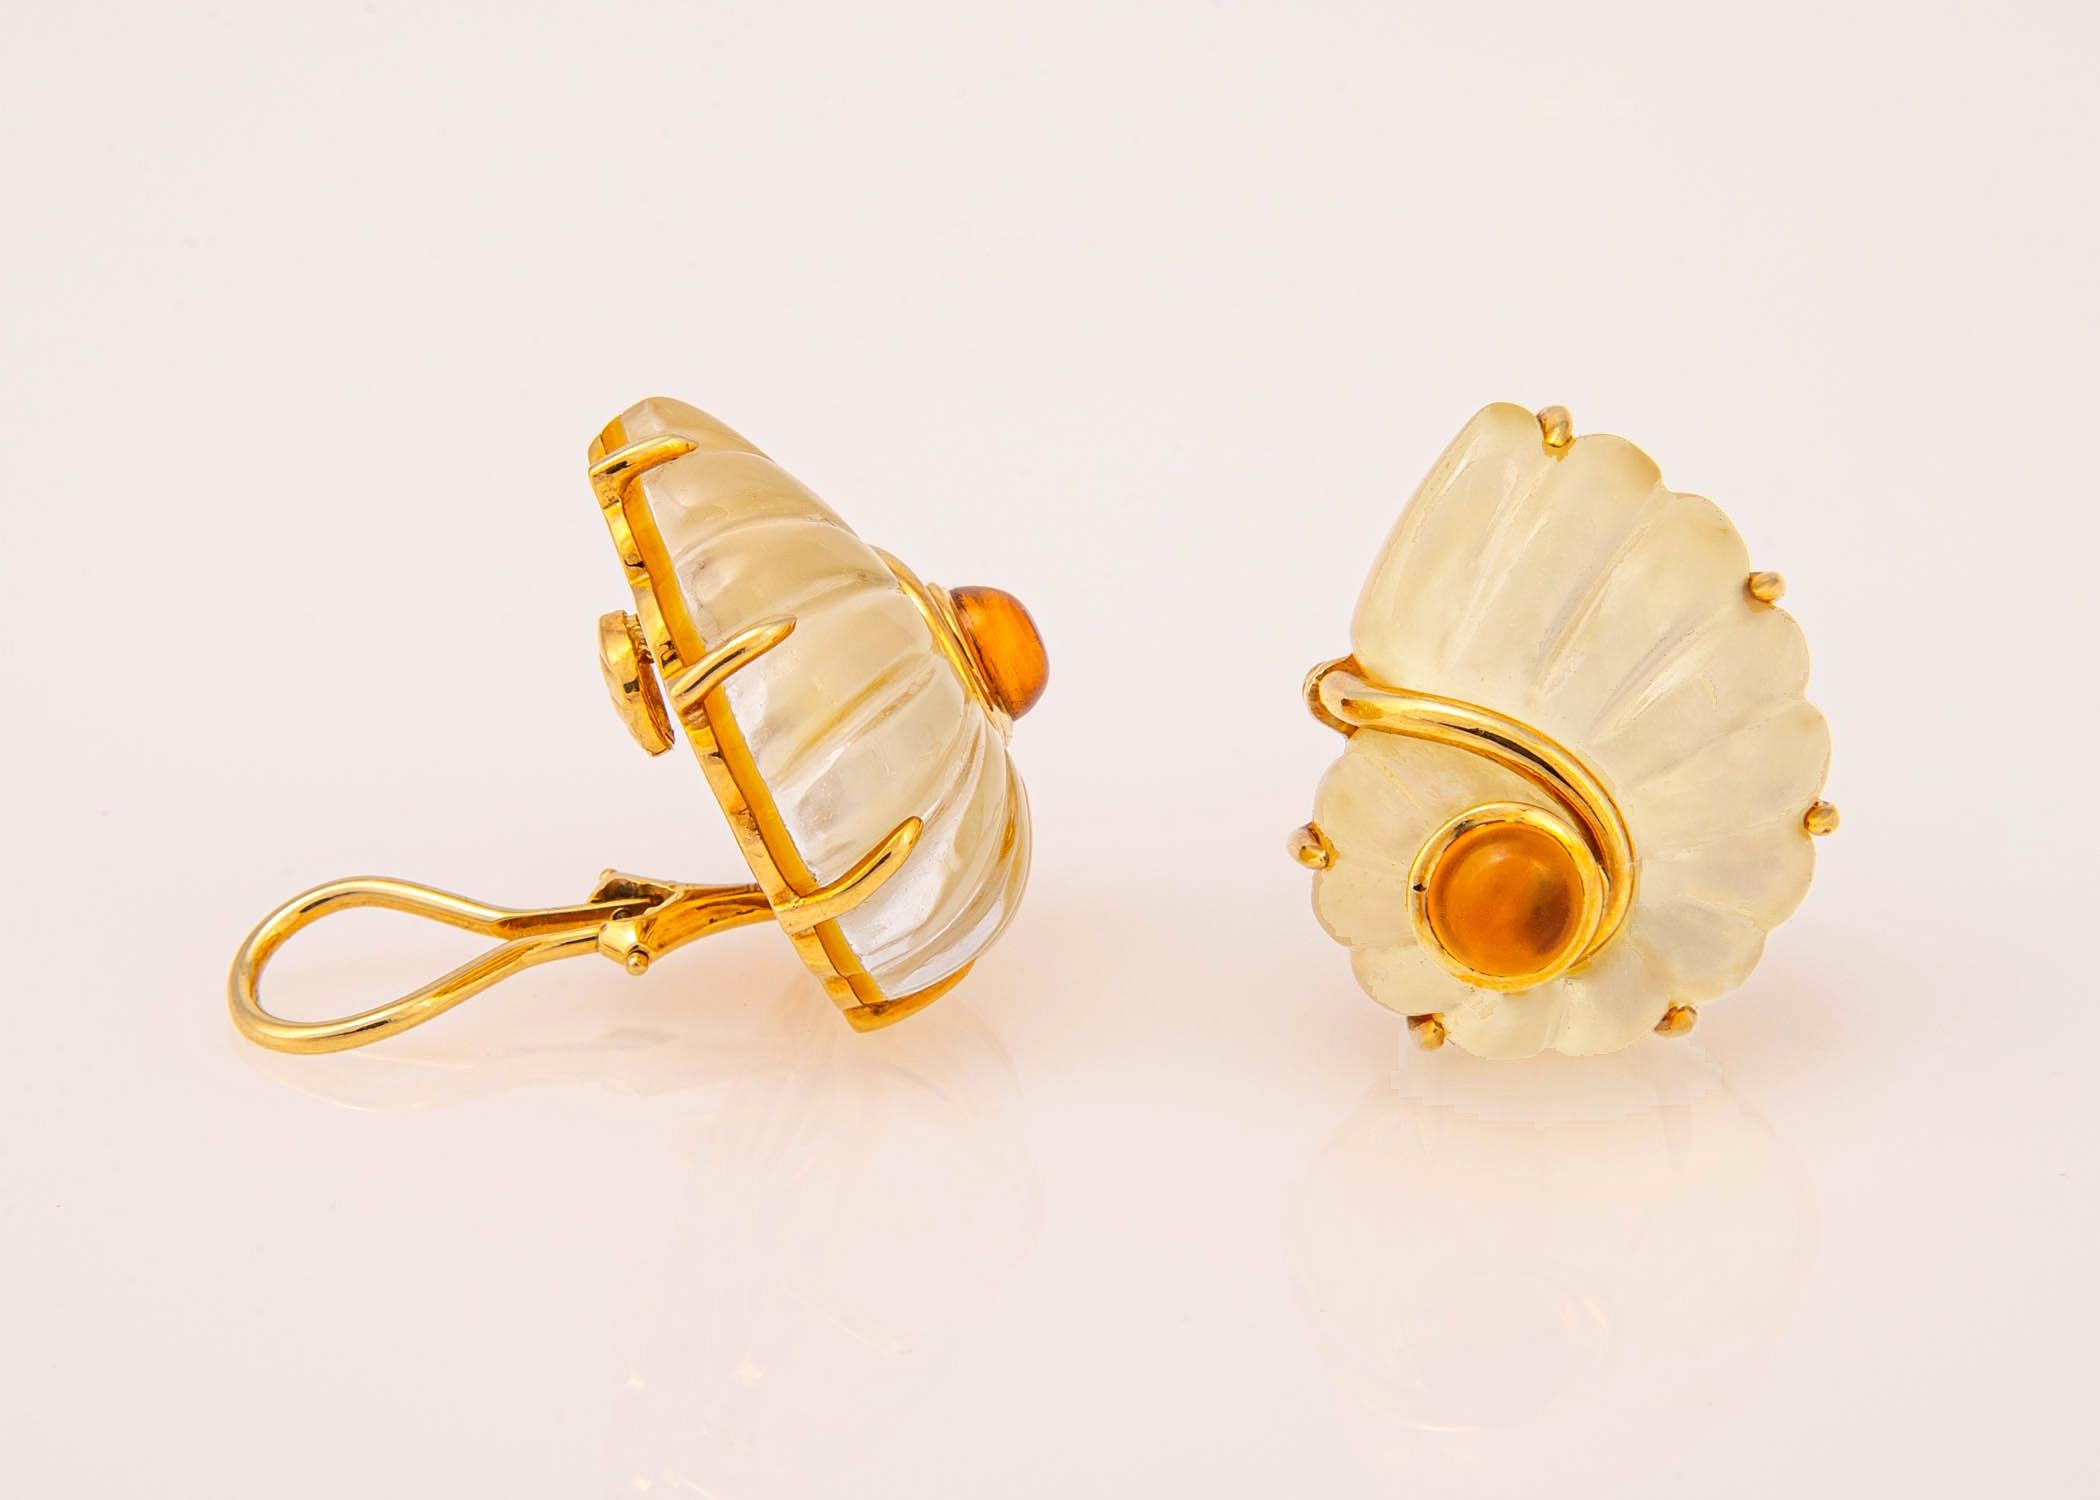 Trianon features carved rock crystal , a cabochon citrine and backs it with mother of pearl . A neutral easy to wear design. Just over 1 inch in size.